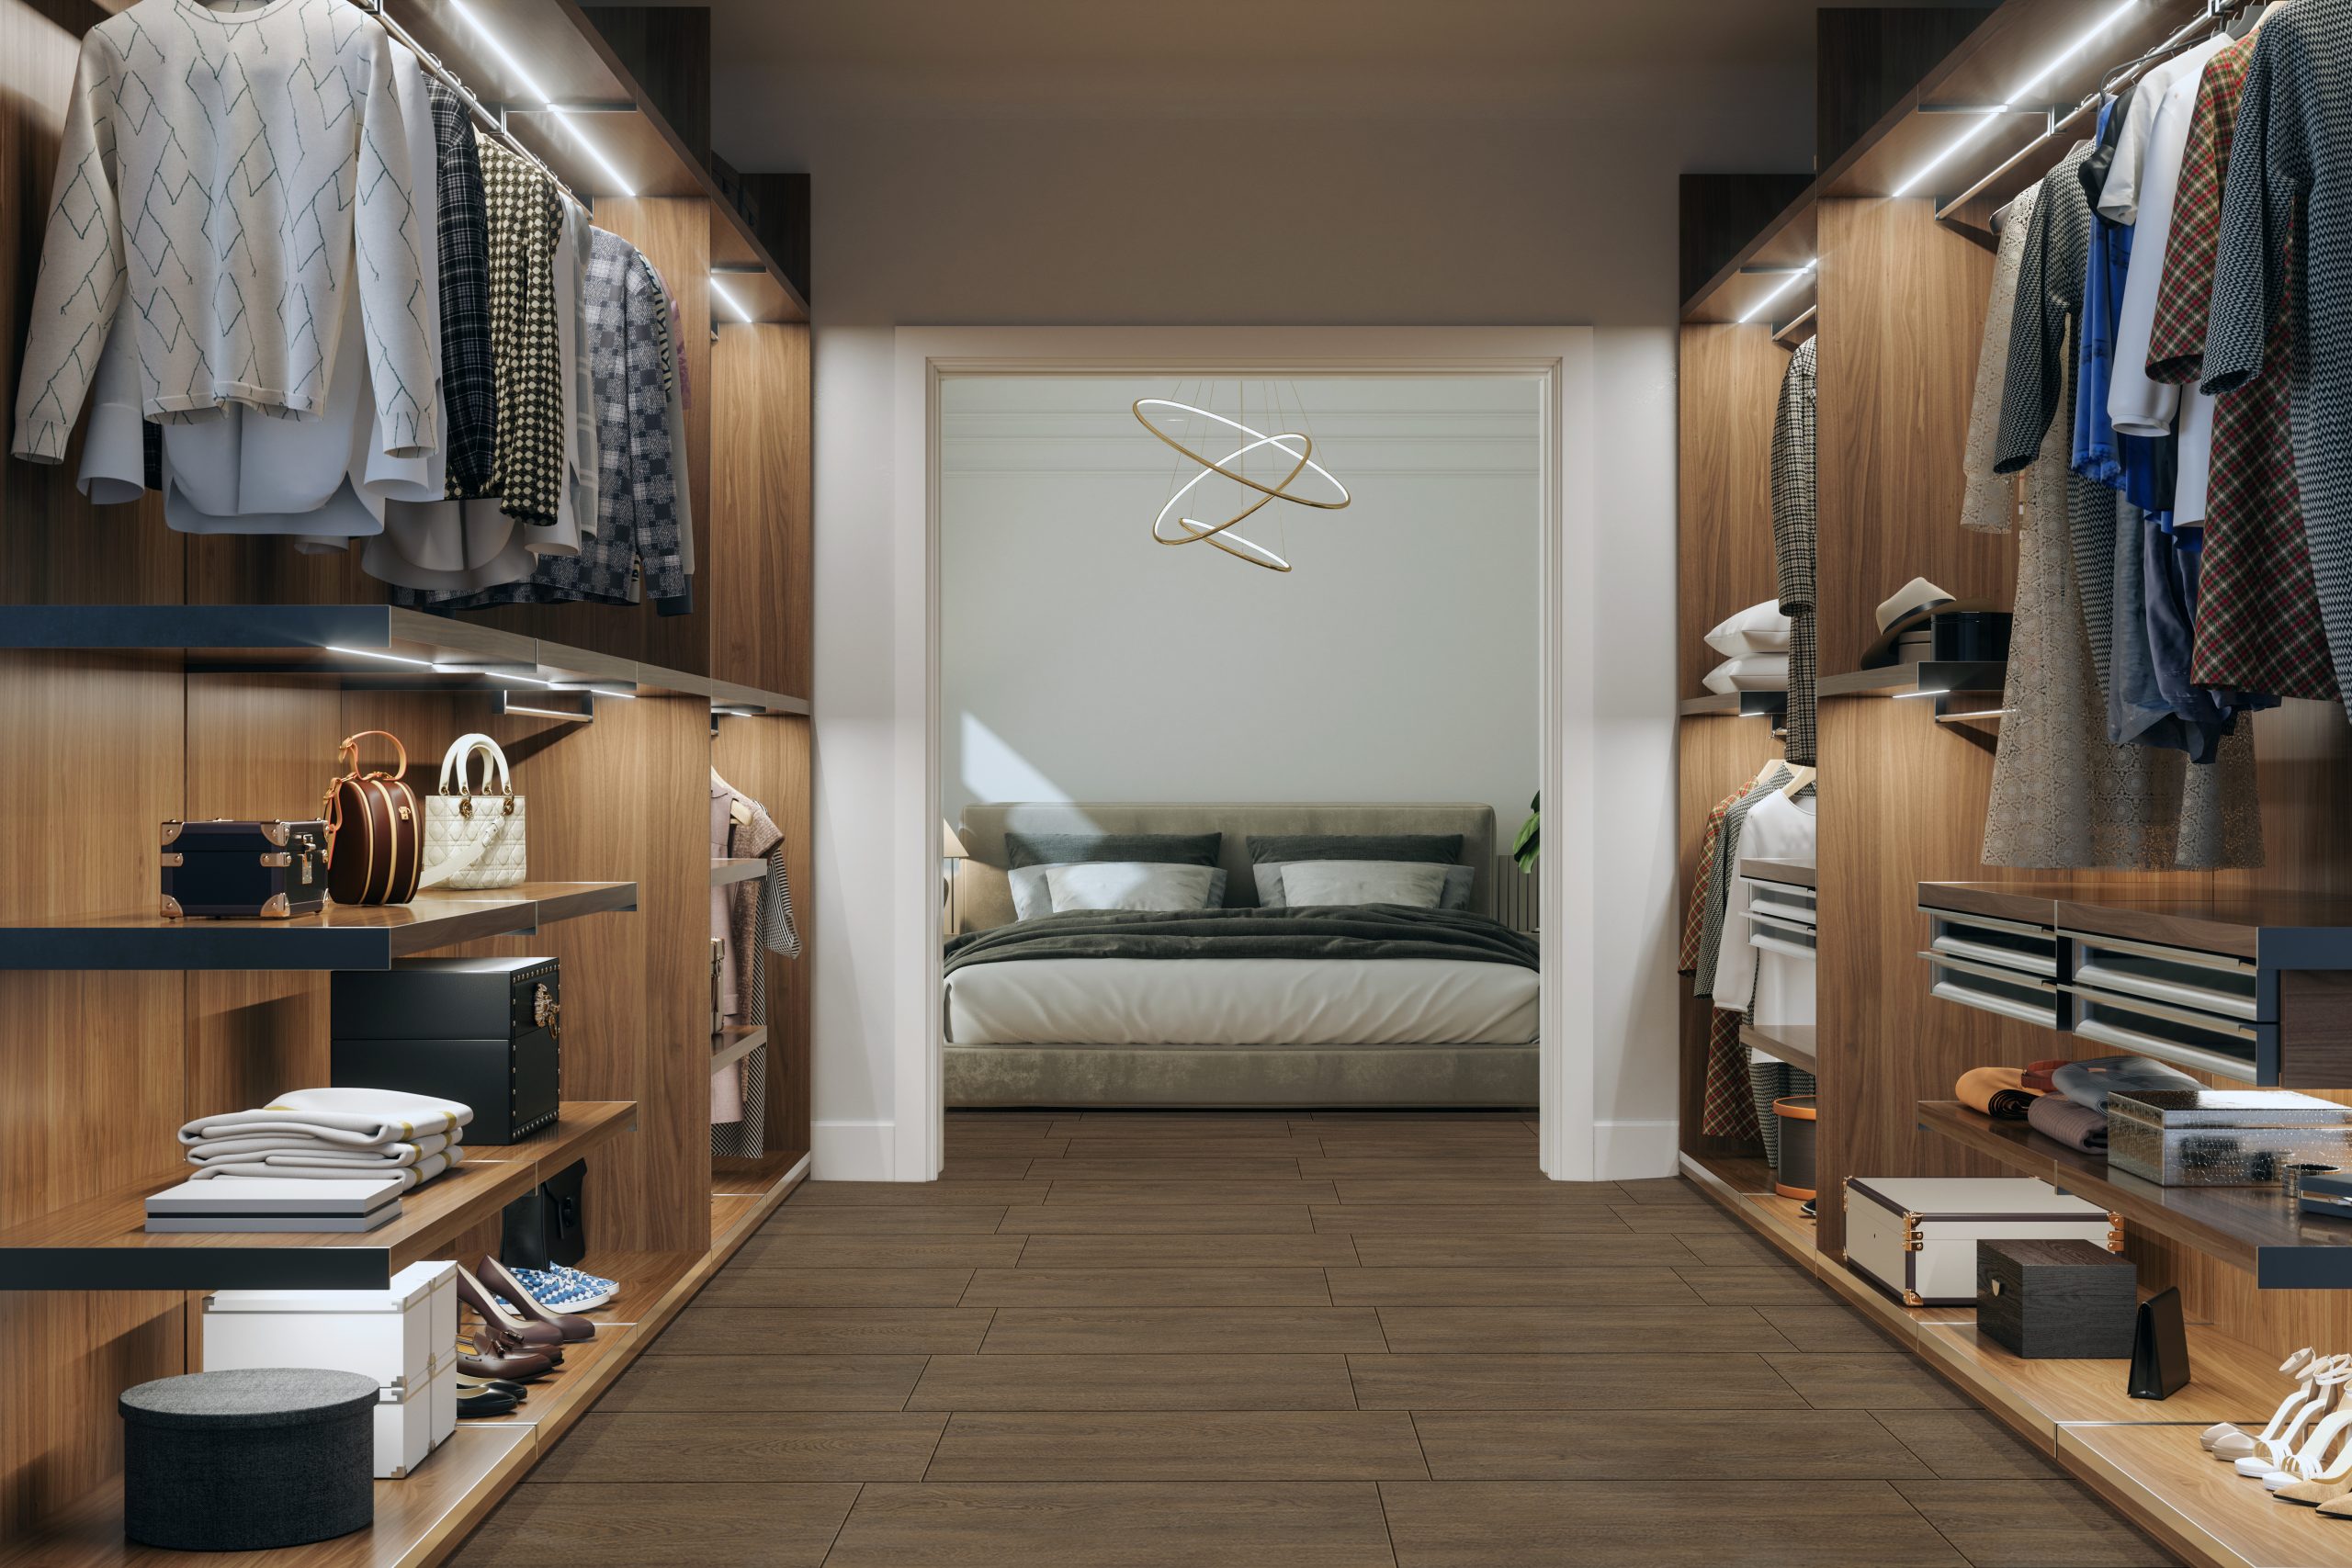 Modern Bedroom And Dressing Room Interior With Shoes, Bags And Hanging Clothes